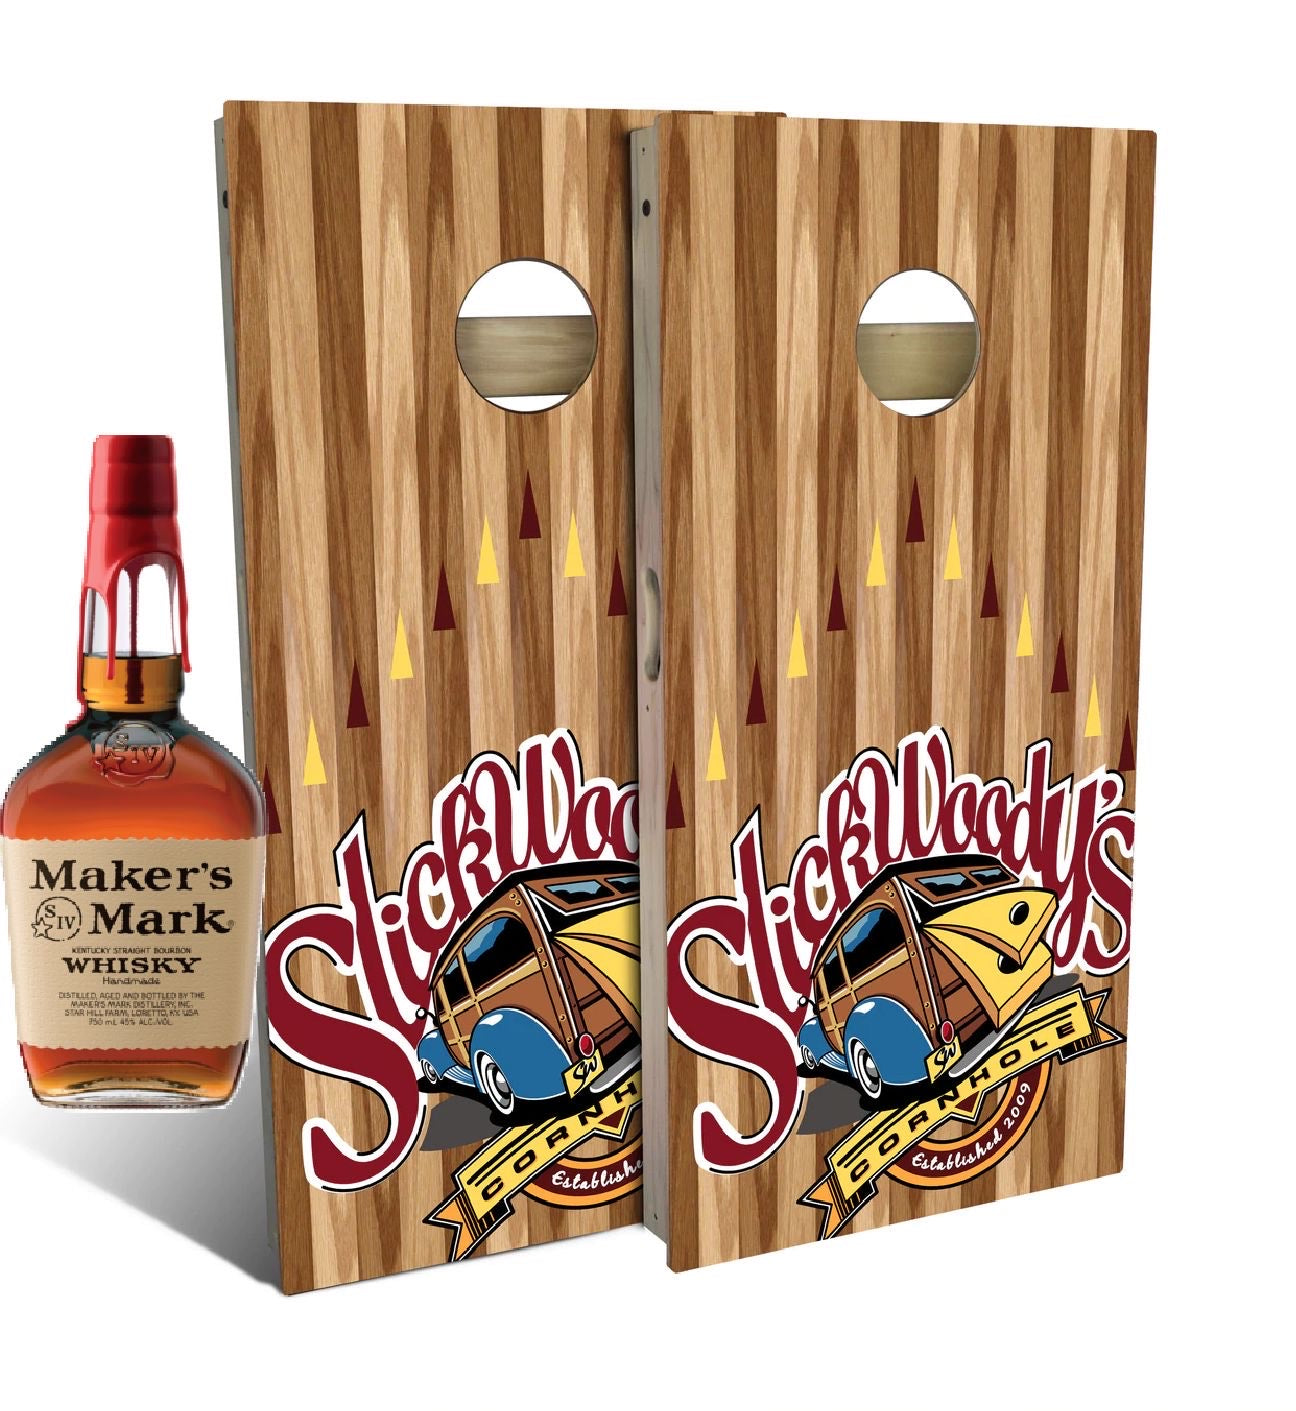 Best Bourbons to go with Slick Woody's Cornhole Boards